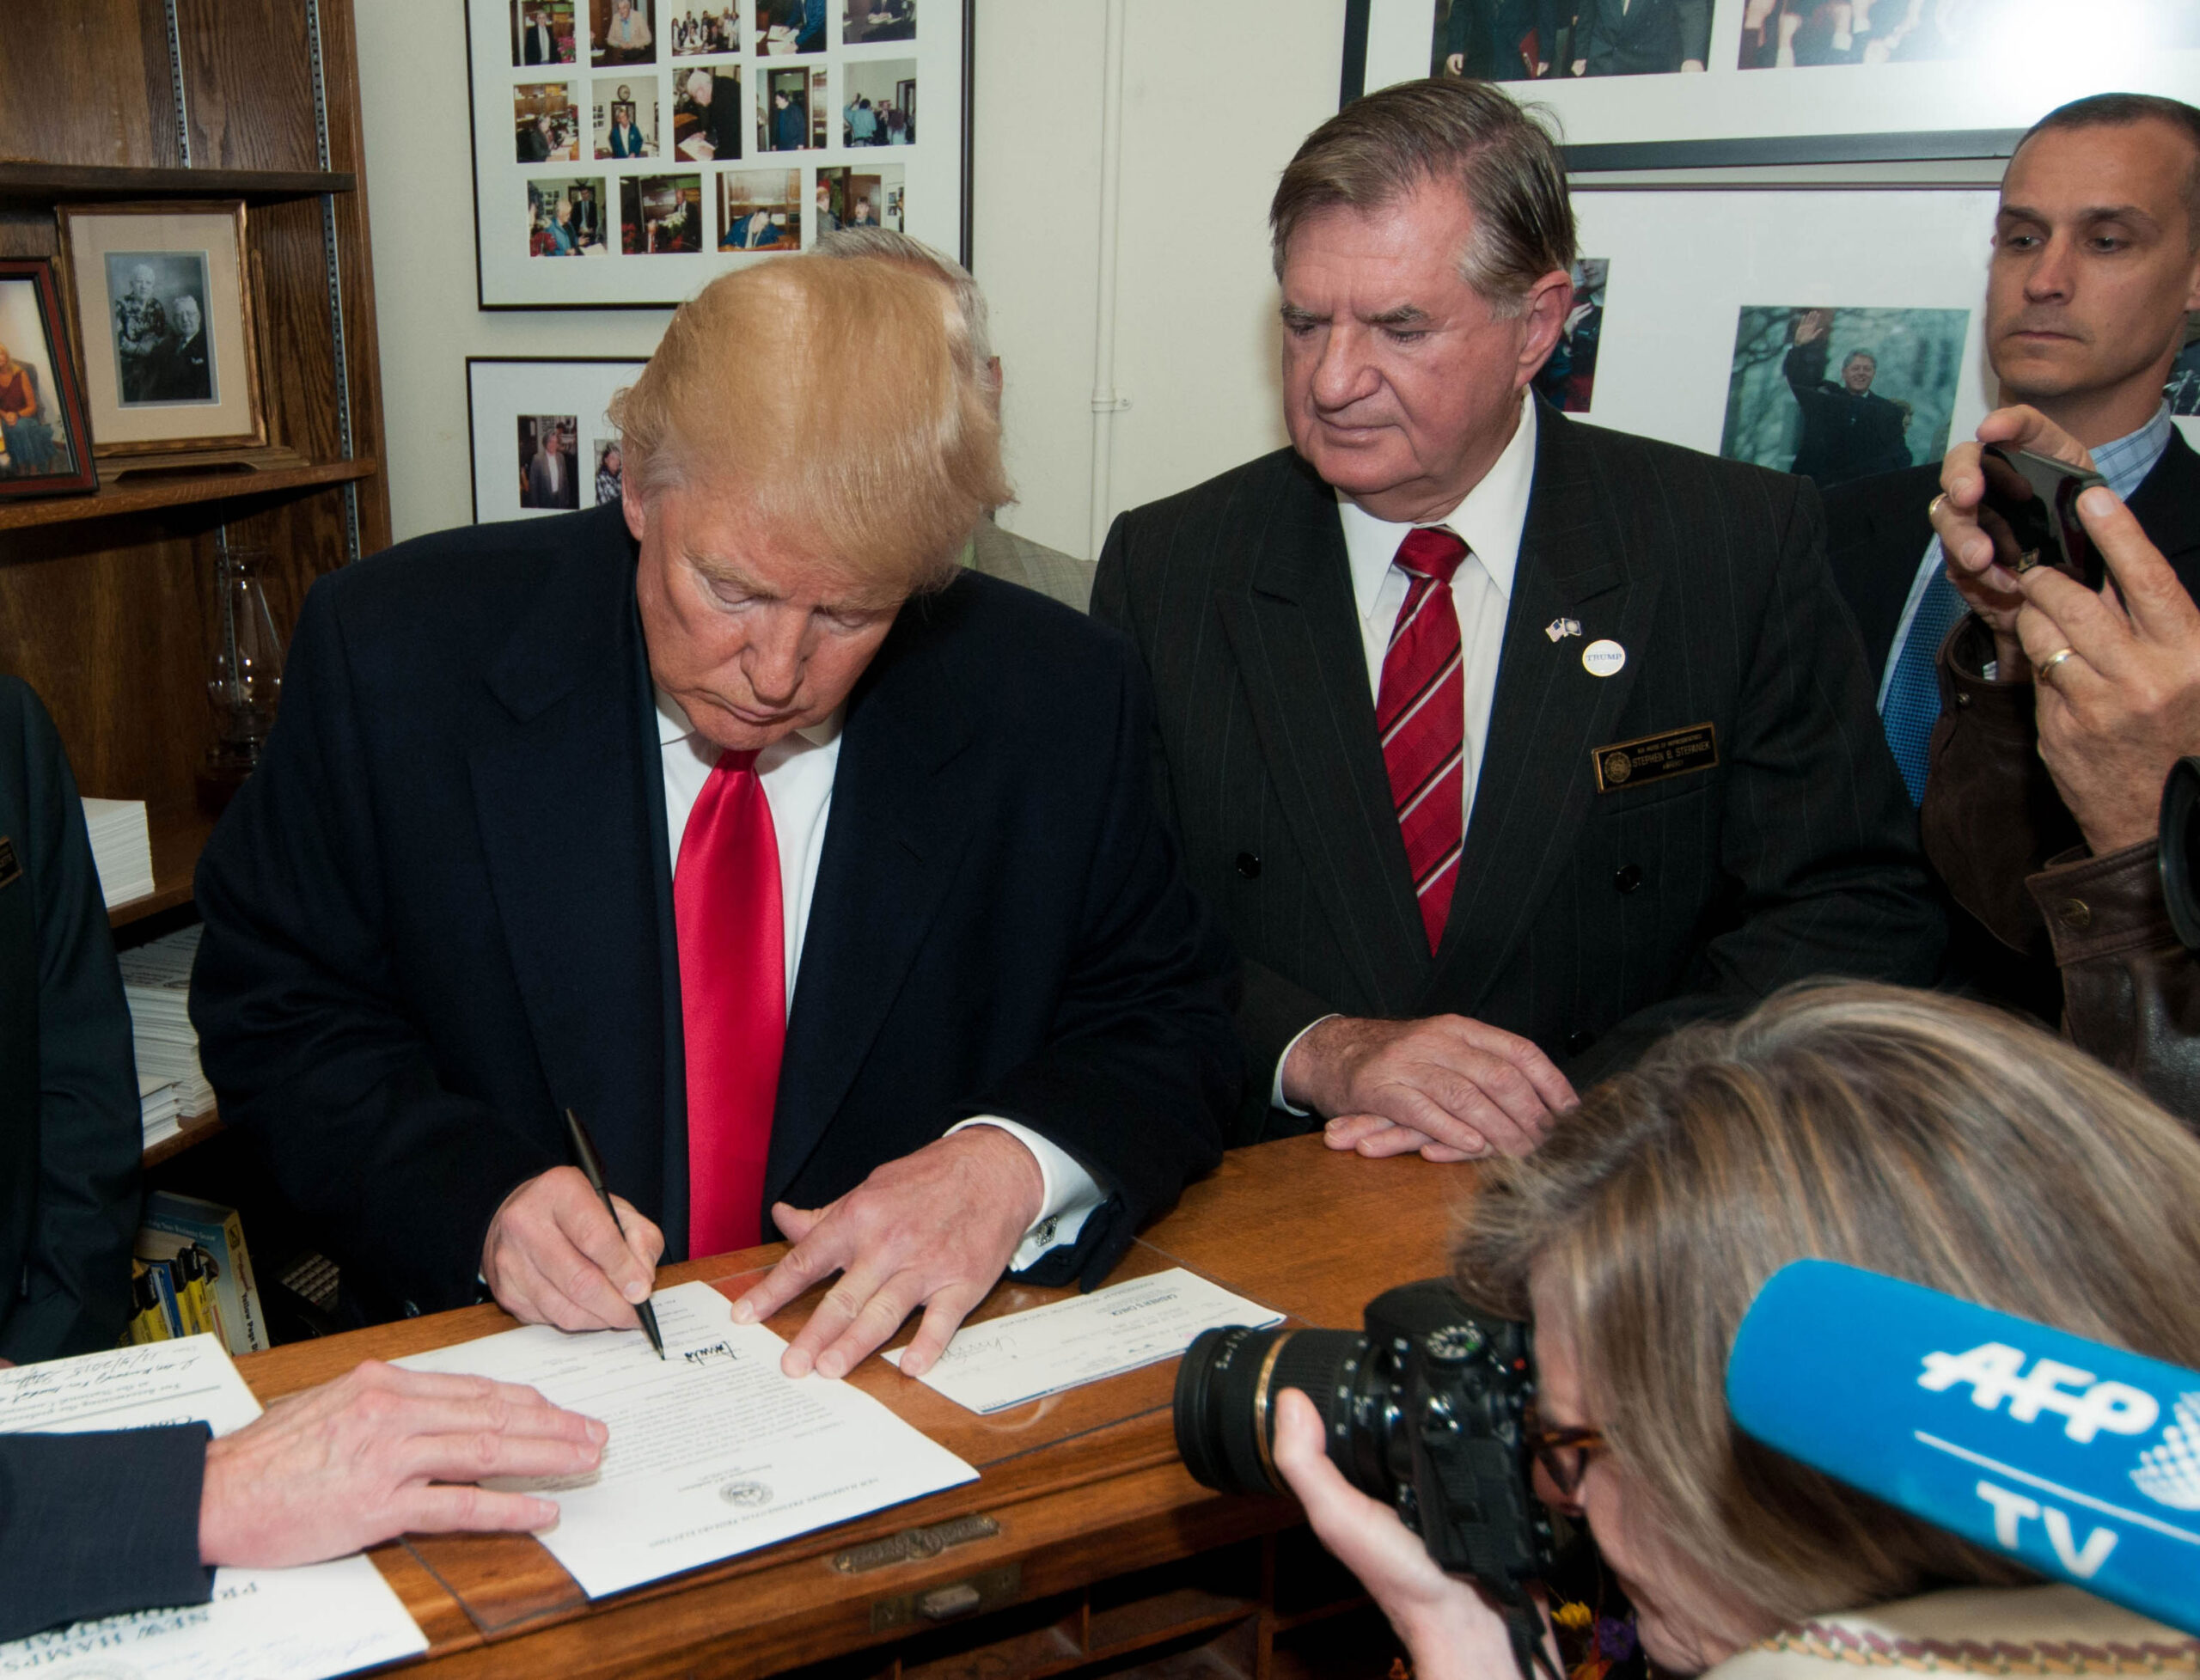 Donald Trump signing papers